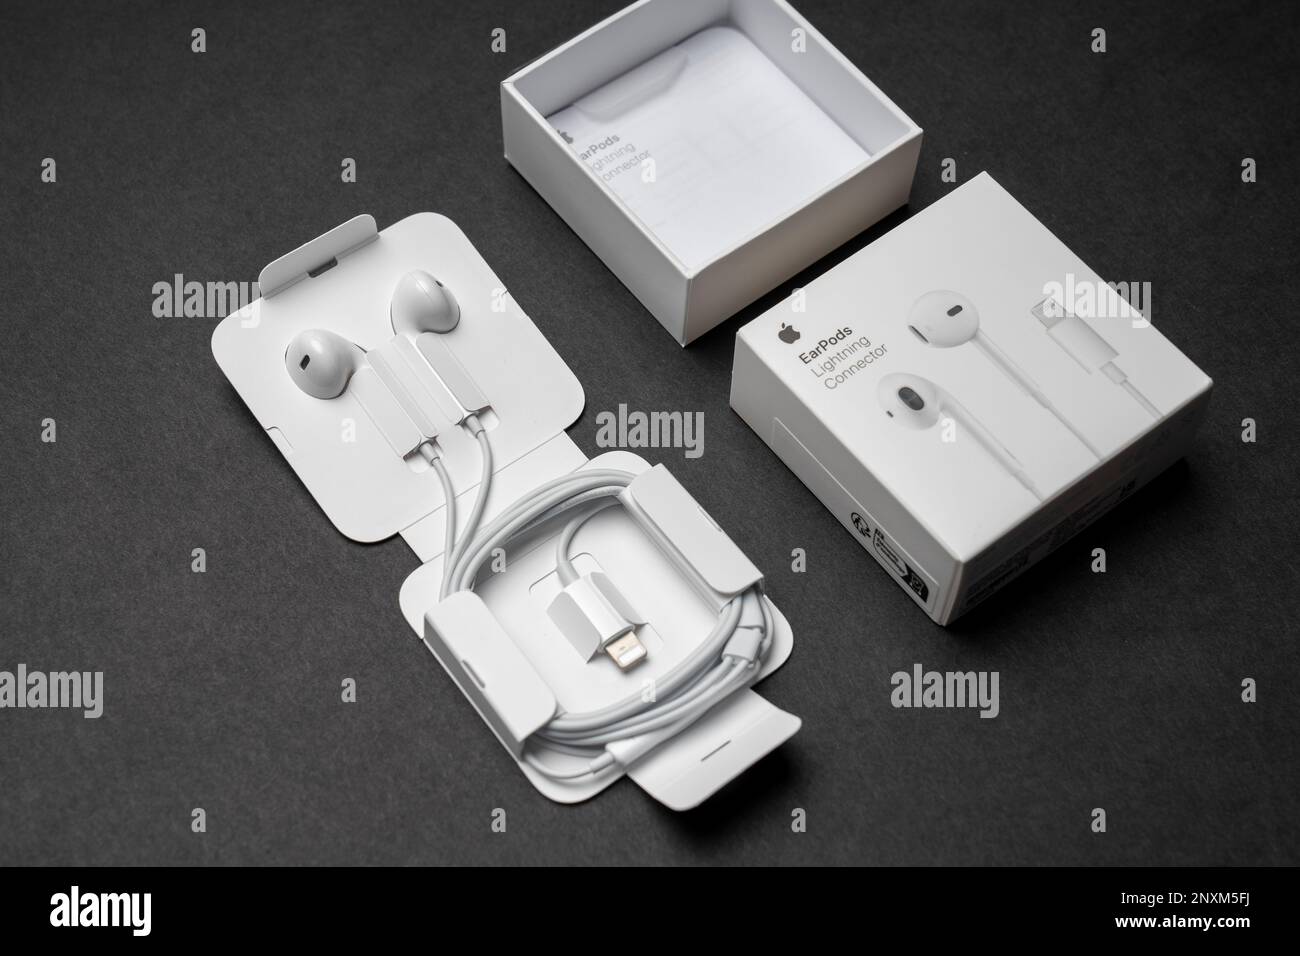 New Apple Earpods, Airpods white earphones for listening to music and podcasts in an open box. Isolated black background. Stock Photo